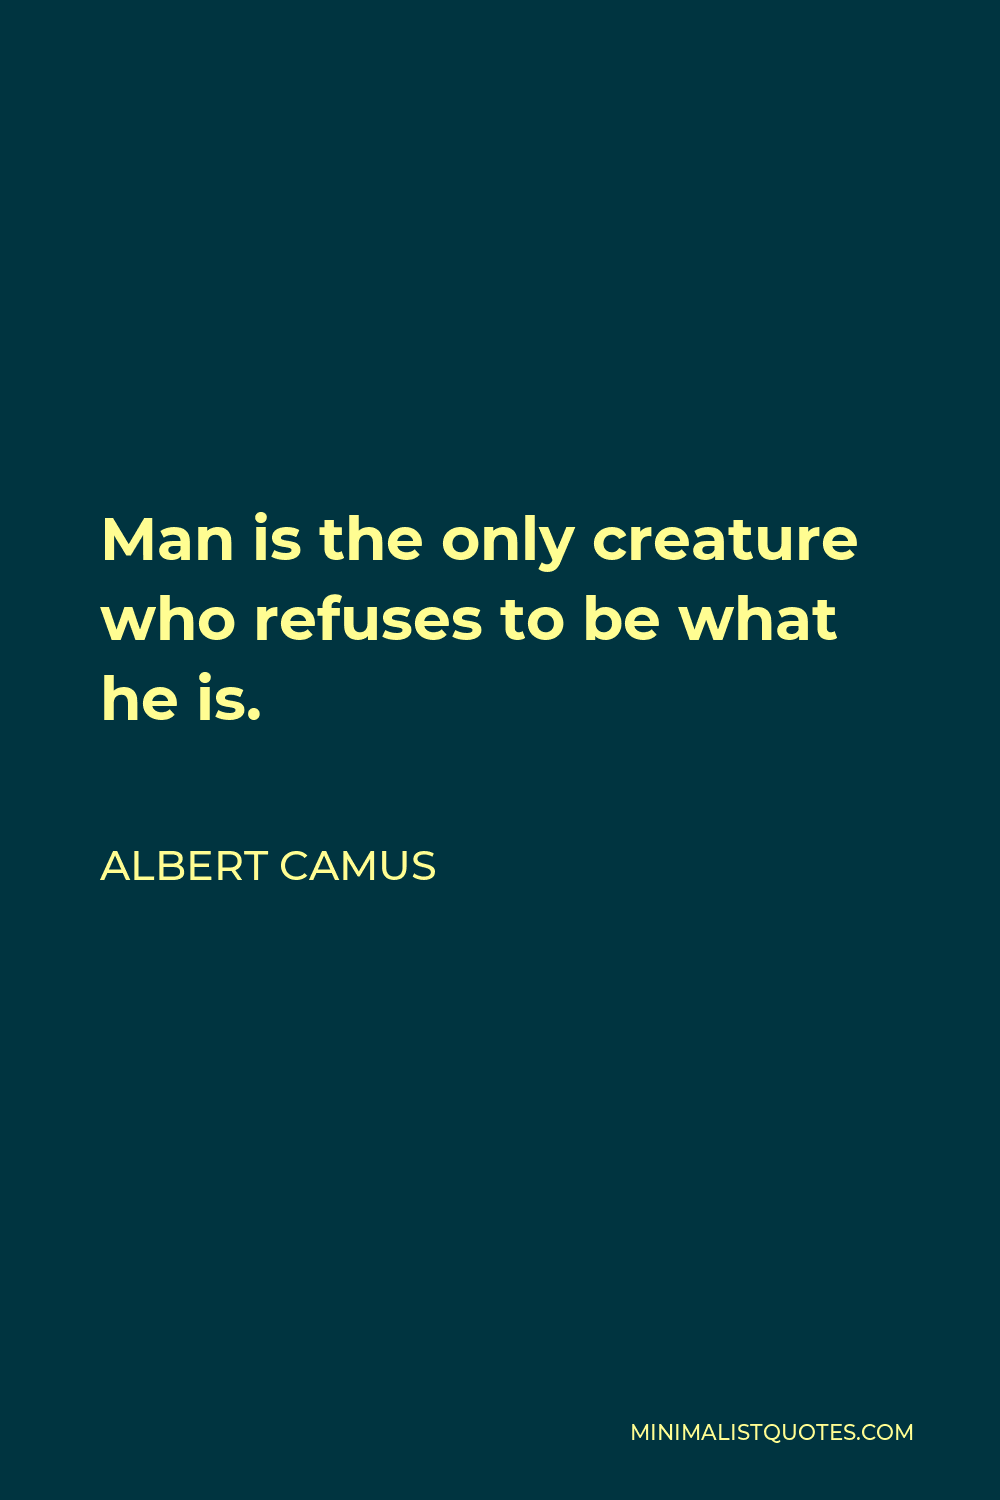 Albert Camus Quote - Man is the only creature who refuses to be what he is.